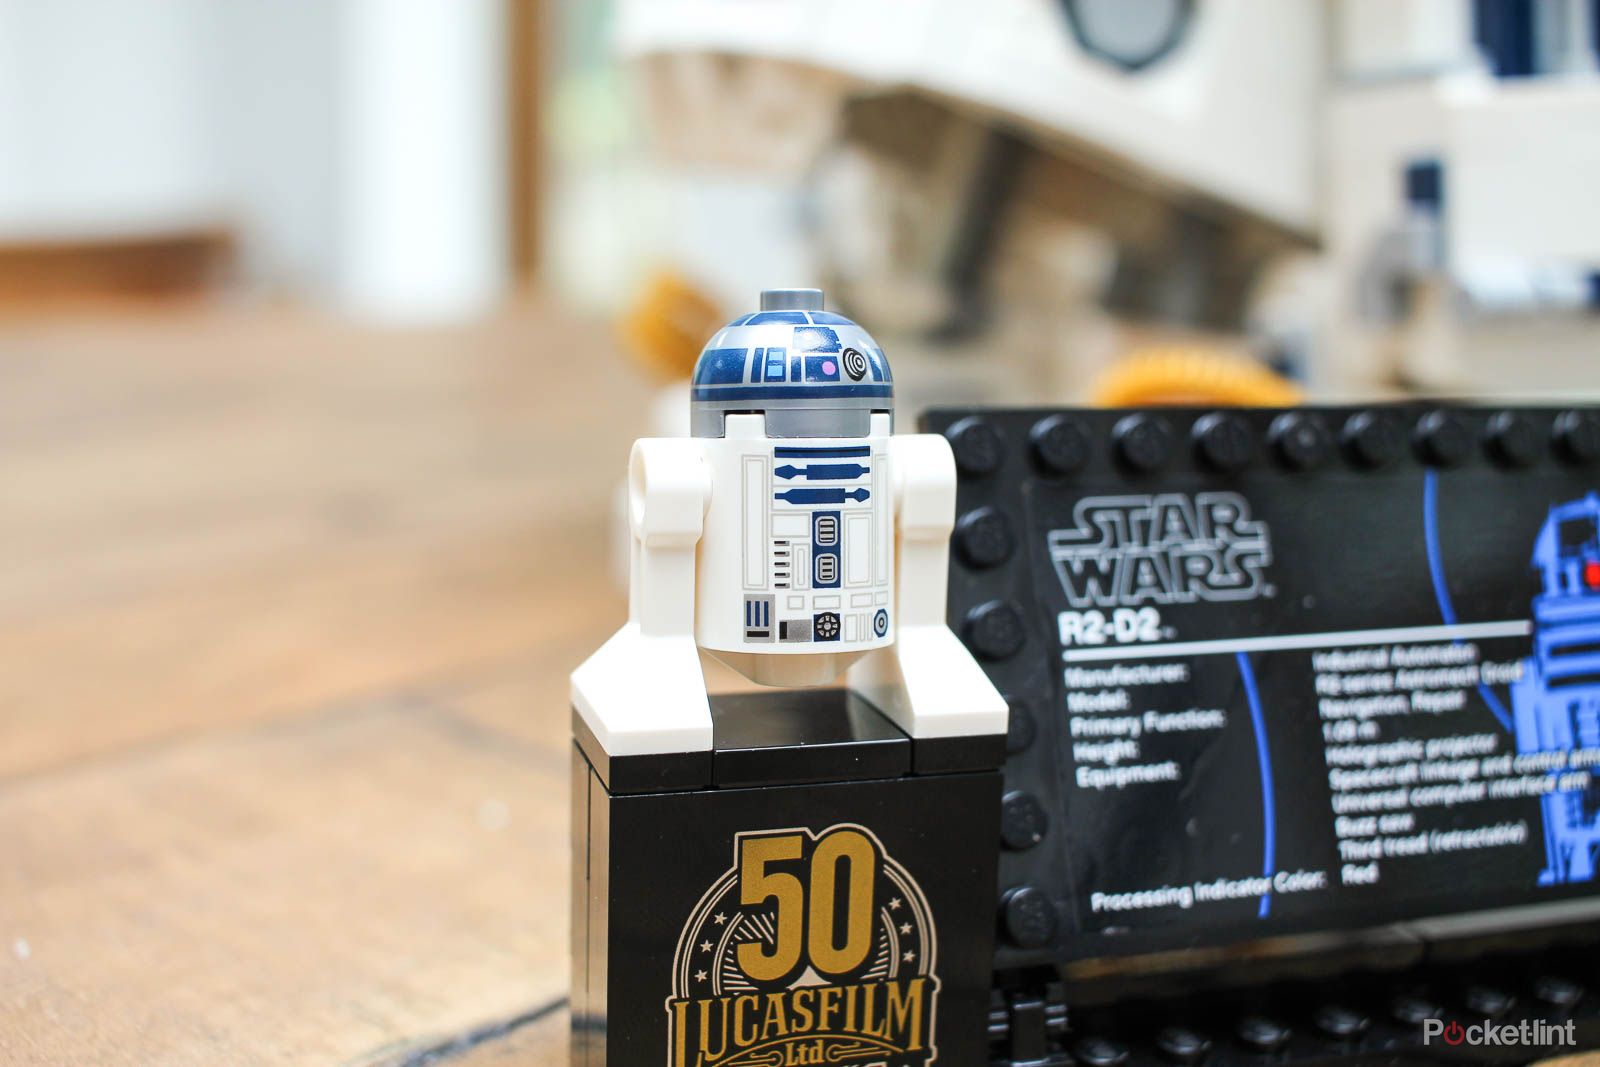 Lego R2-D2 hands on build pictures photo 18